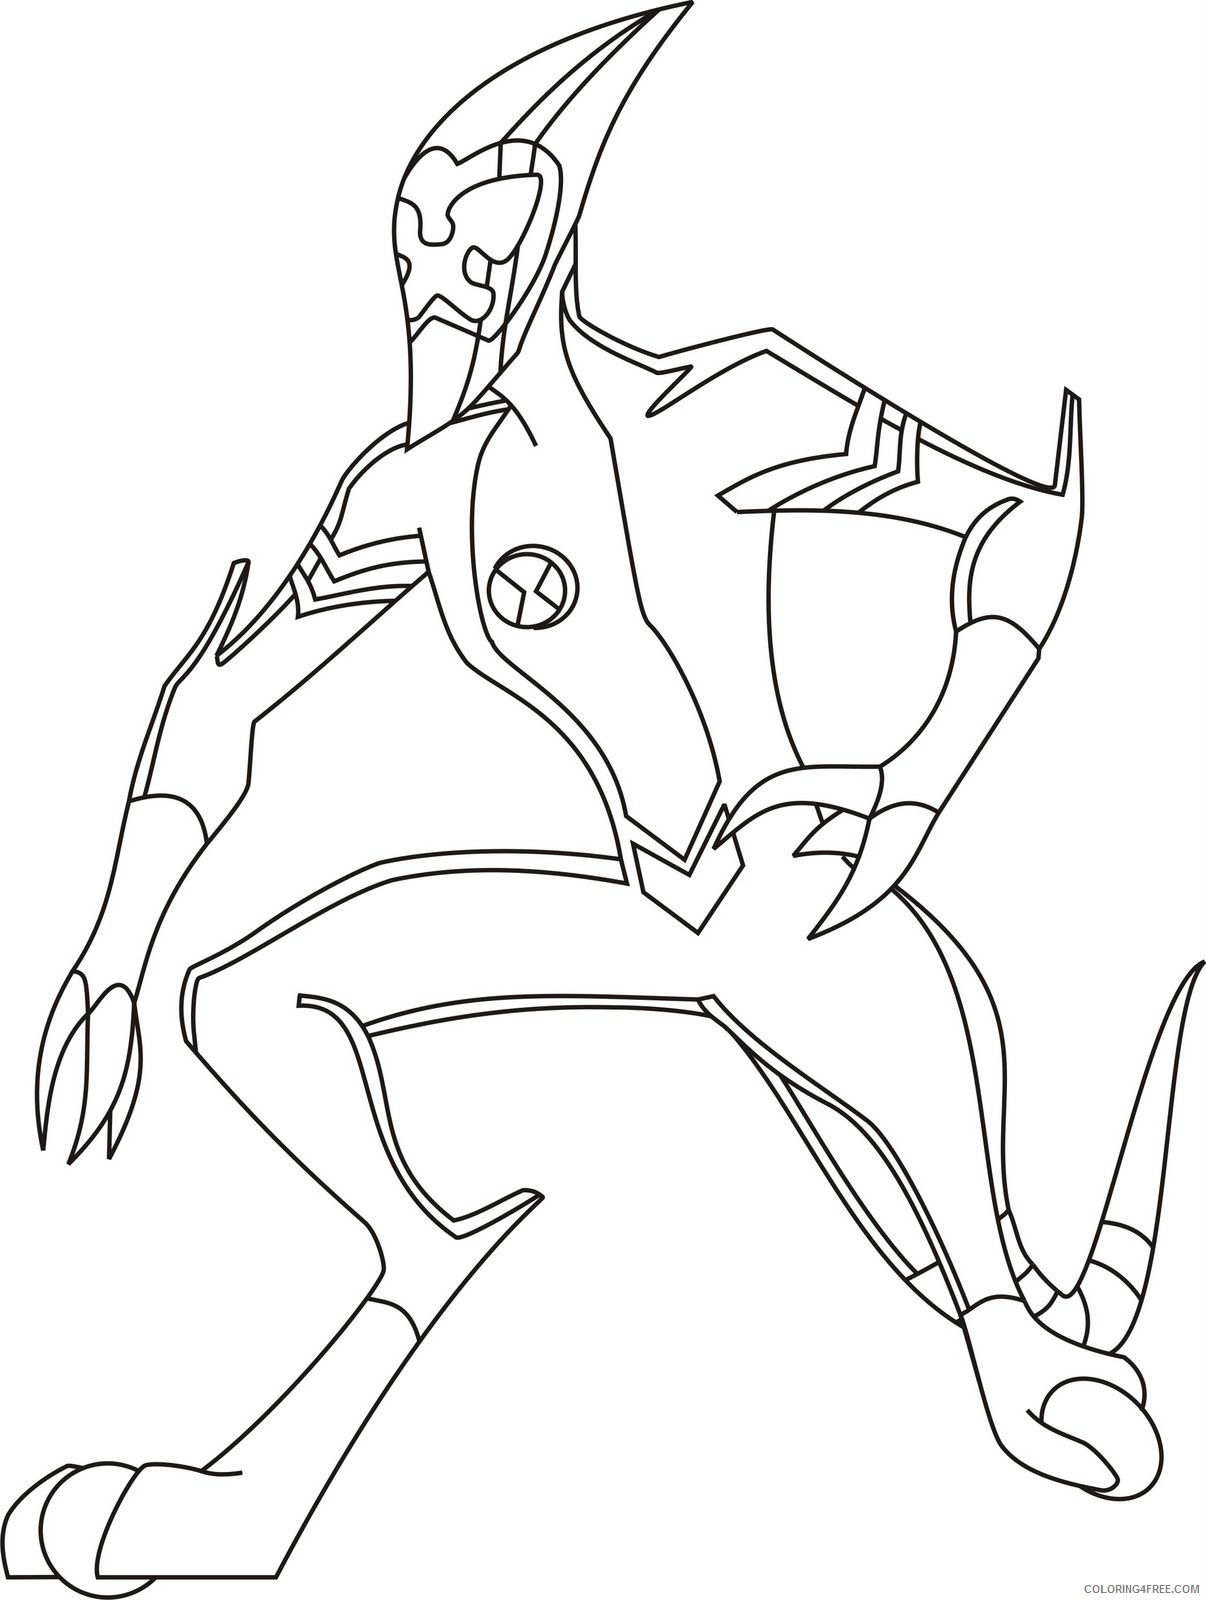 ben 10 coloring pages xlr8 Coloring4free